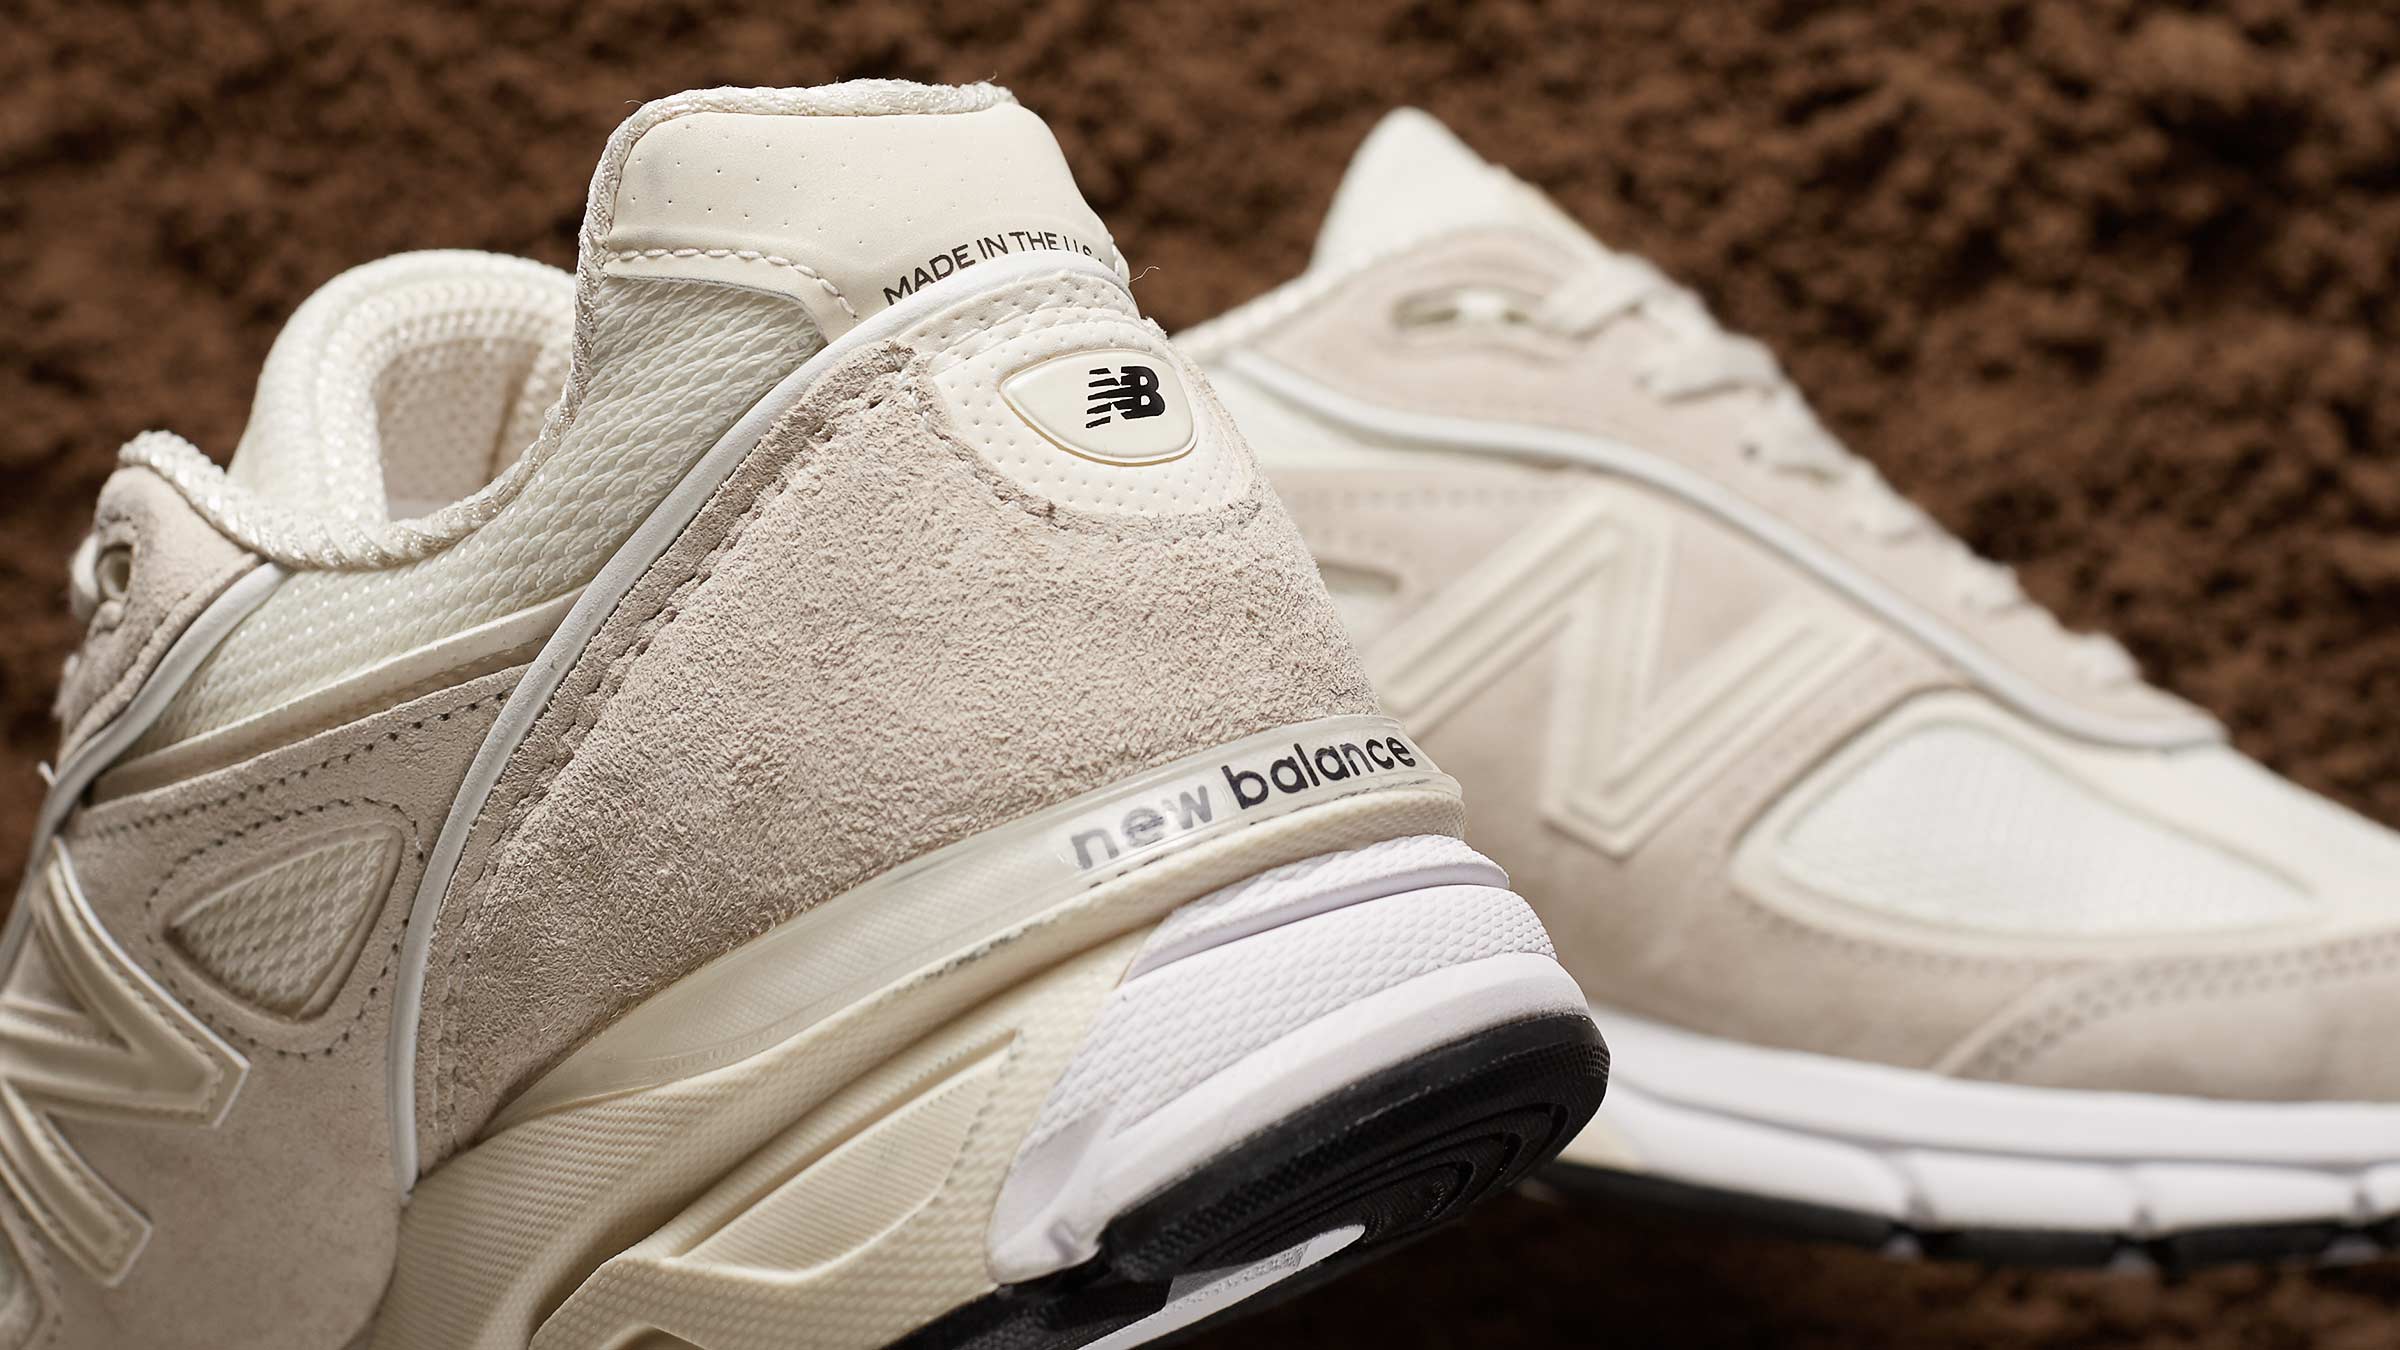 New Balance x Stussy 990V4 (White) | END. Launches